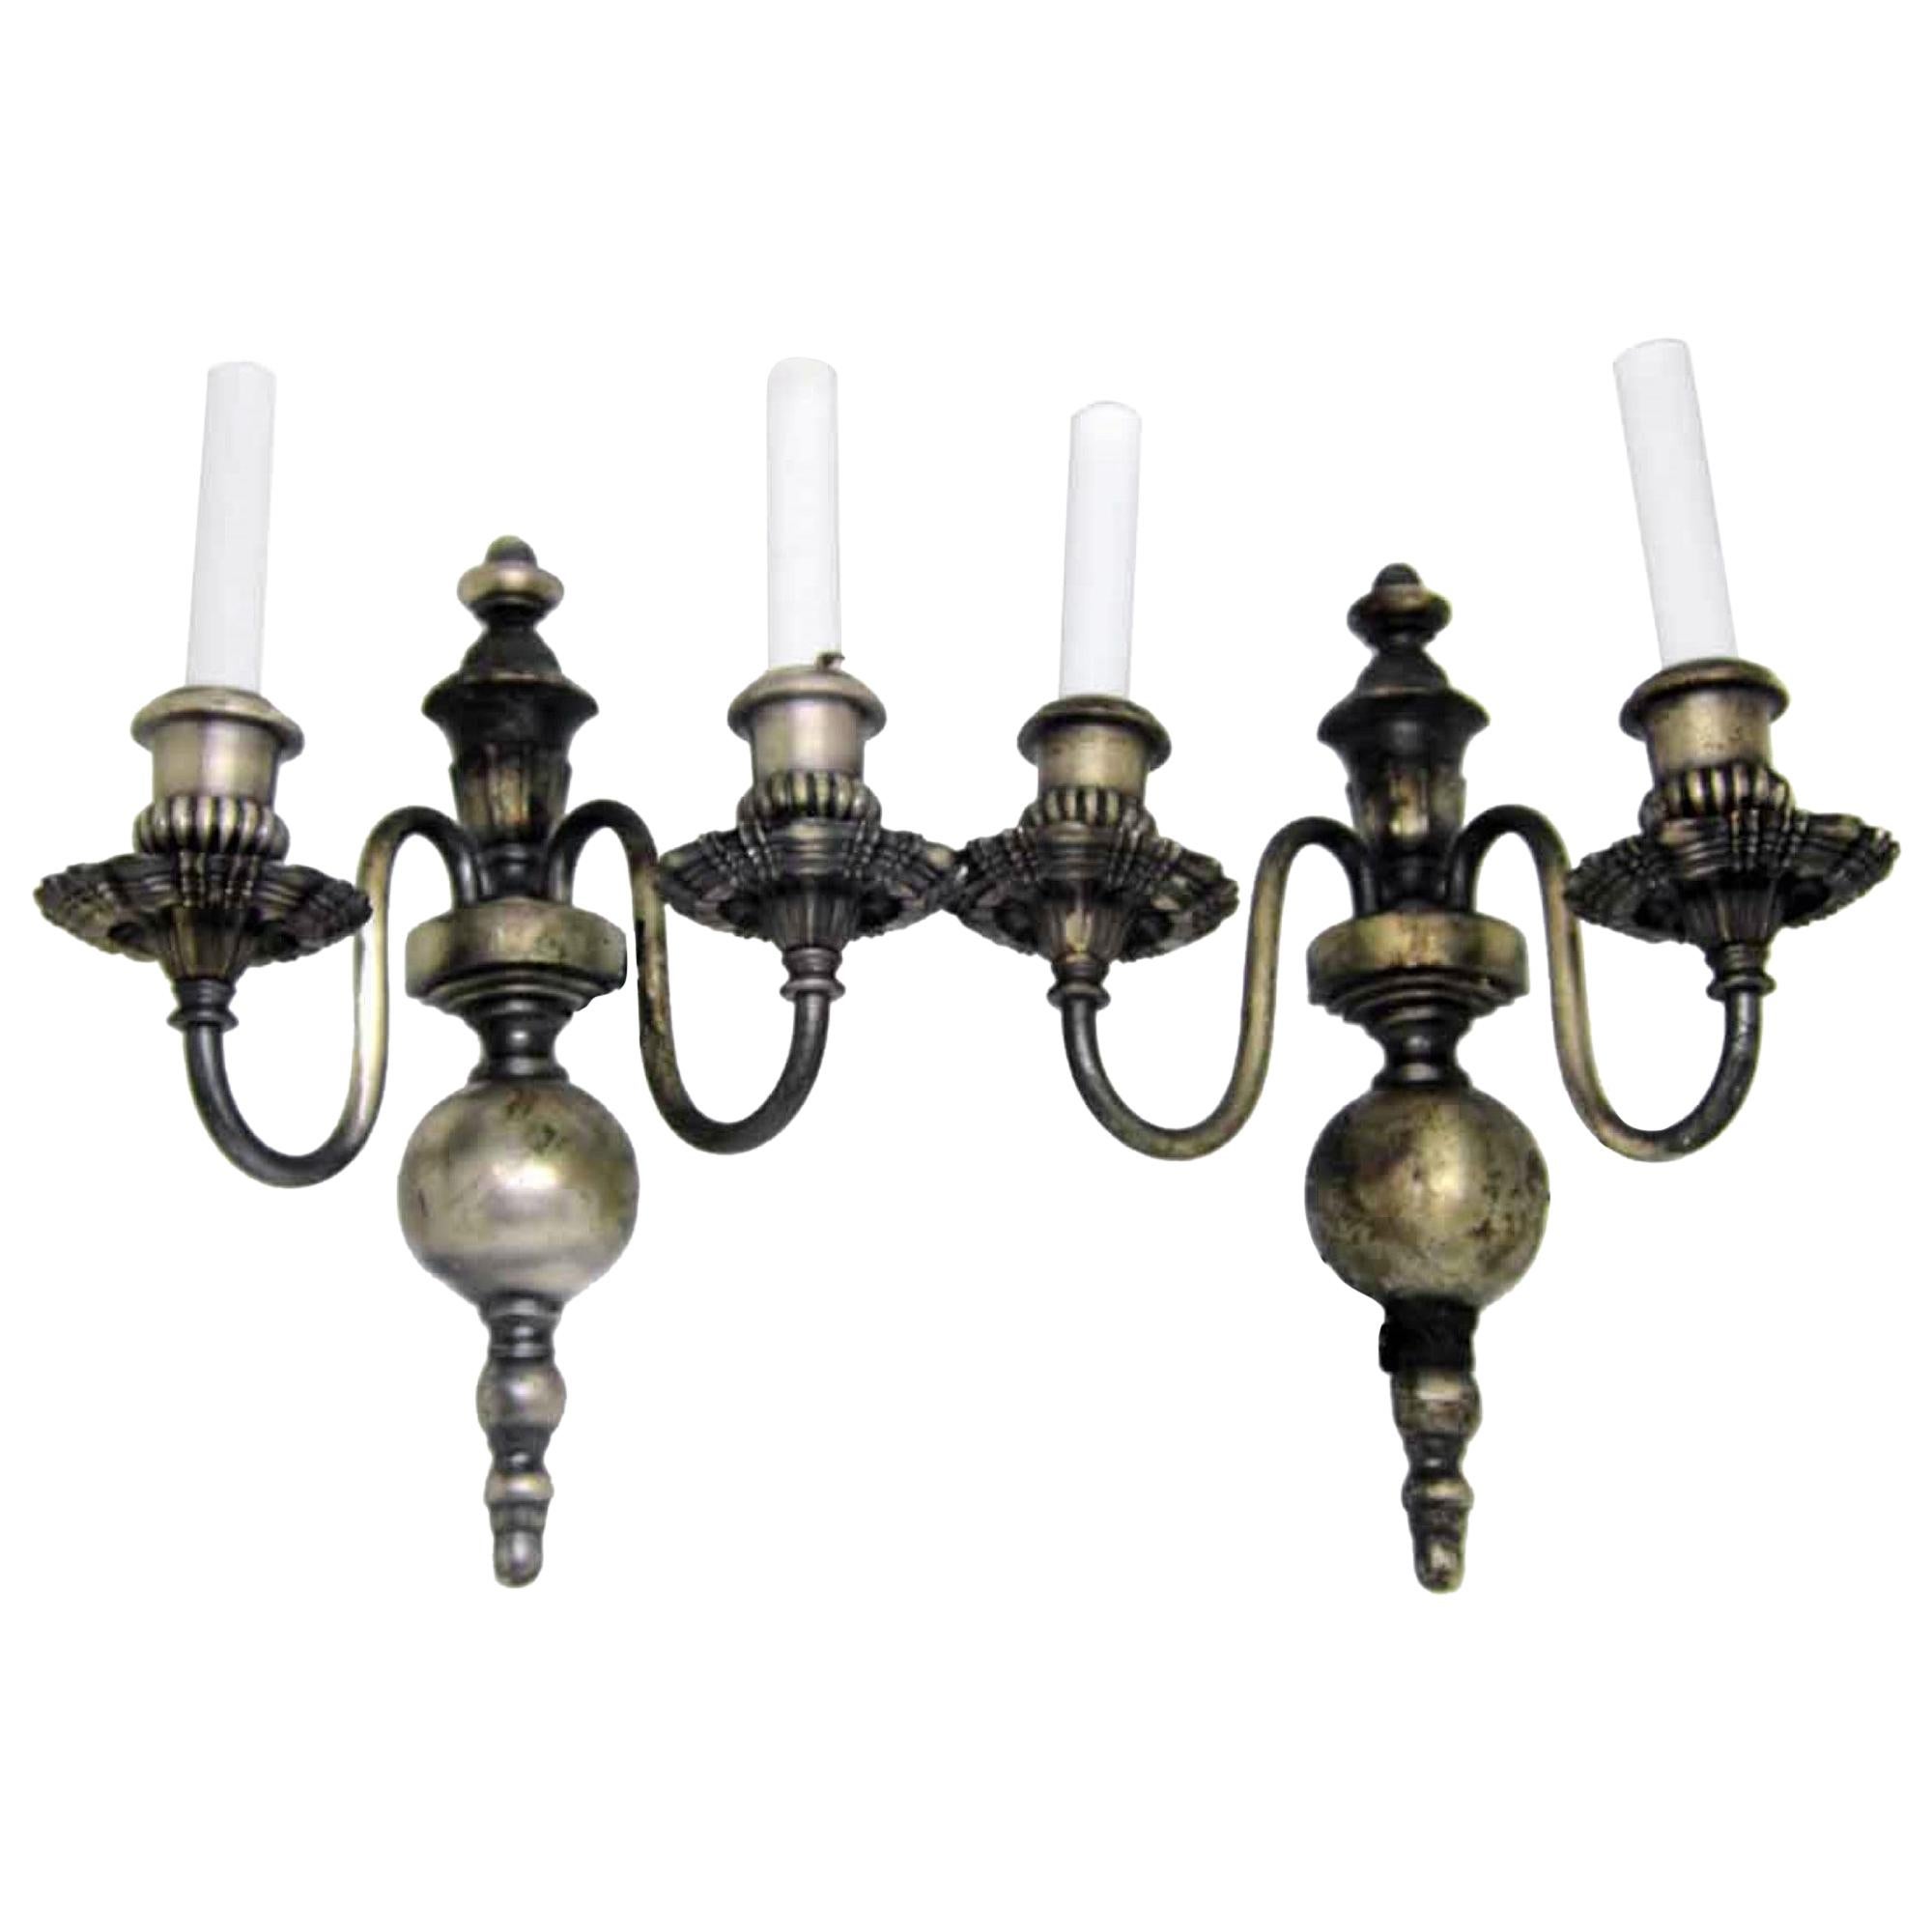 1920s Pair of Silver Over Cast Brass Sconces with Two Arms